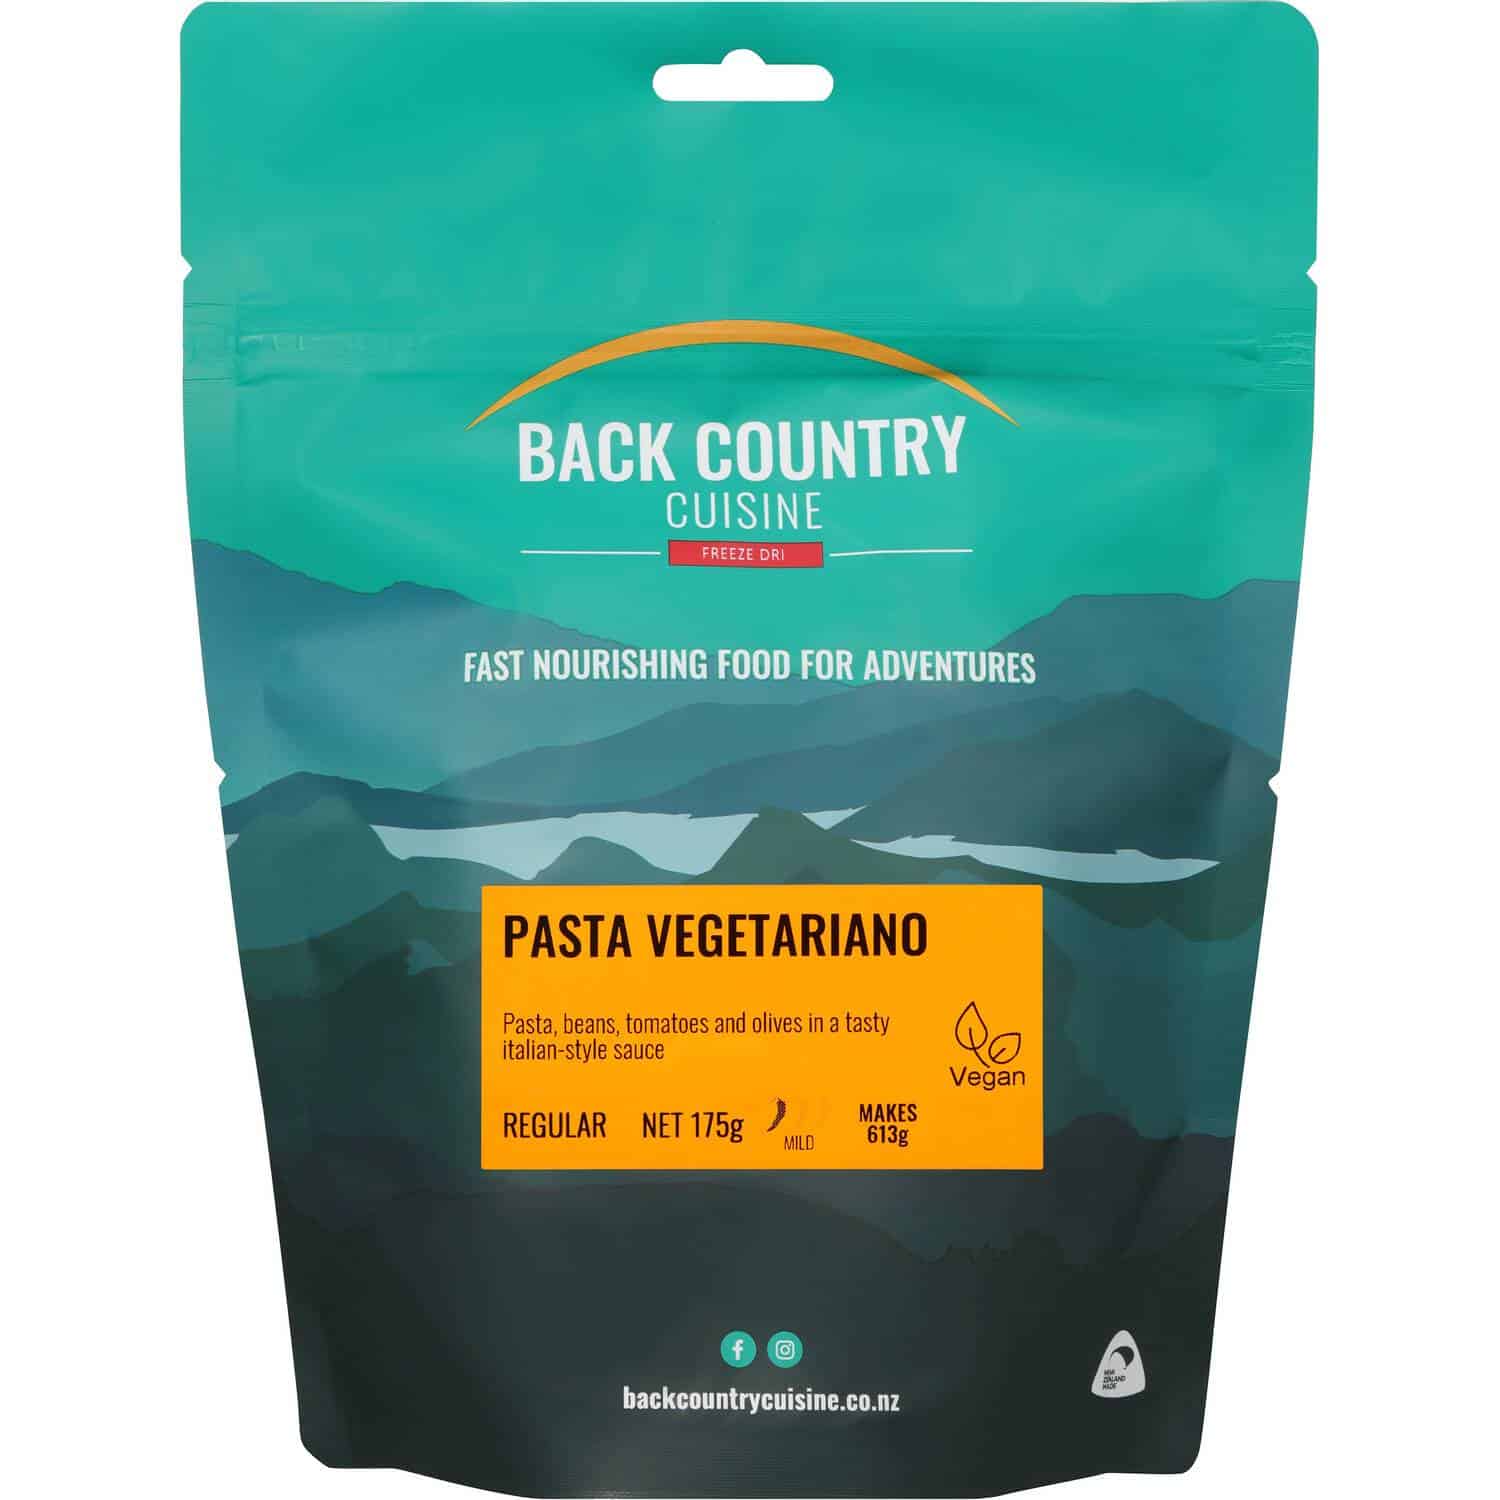 Back Country Cuisine Pasta Vegetariano Regular - Tramping Food and Accessories sold by Venture Outdoors NZ